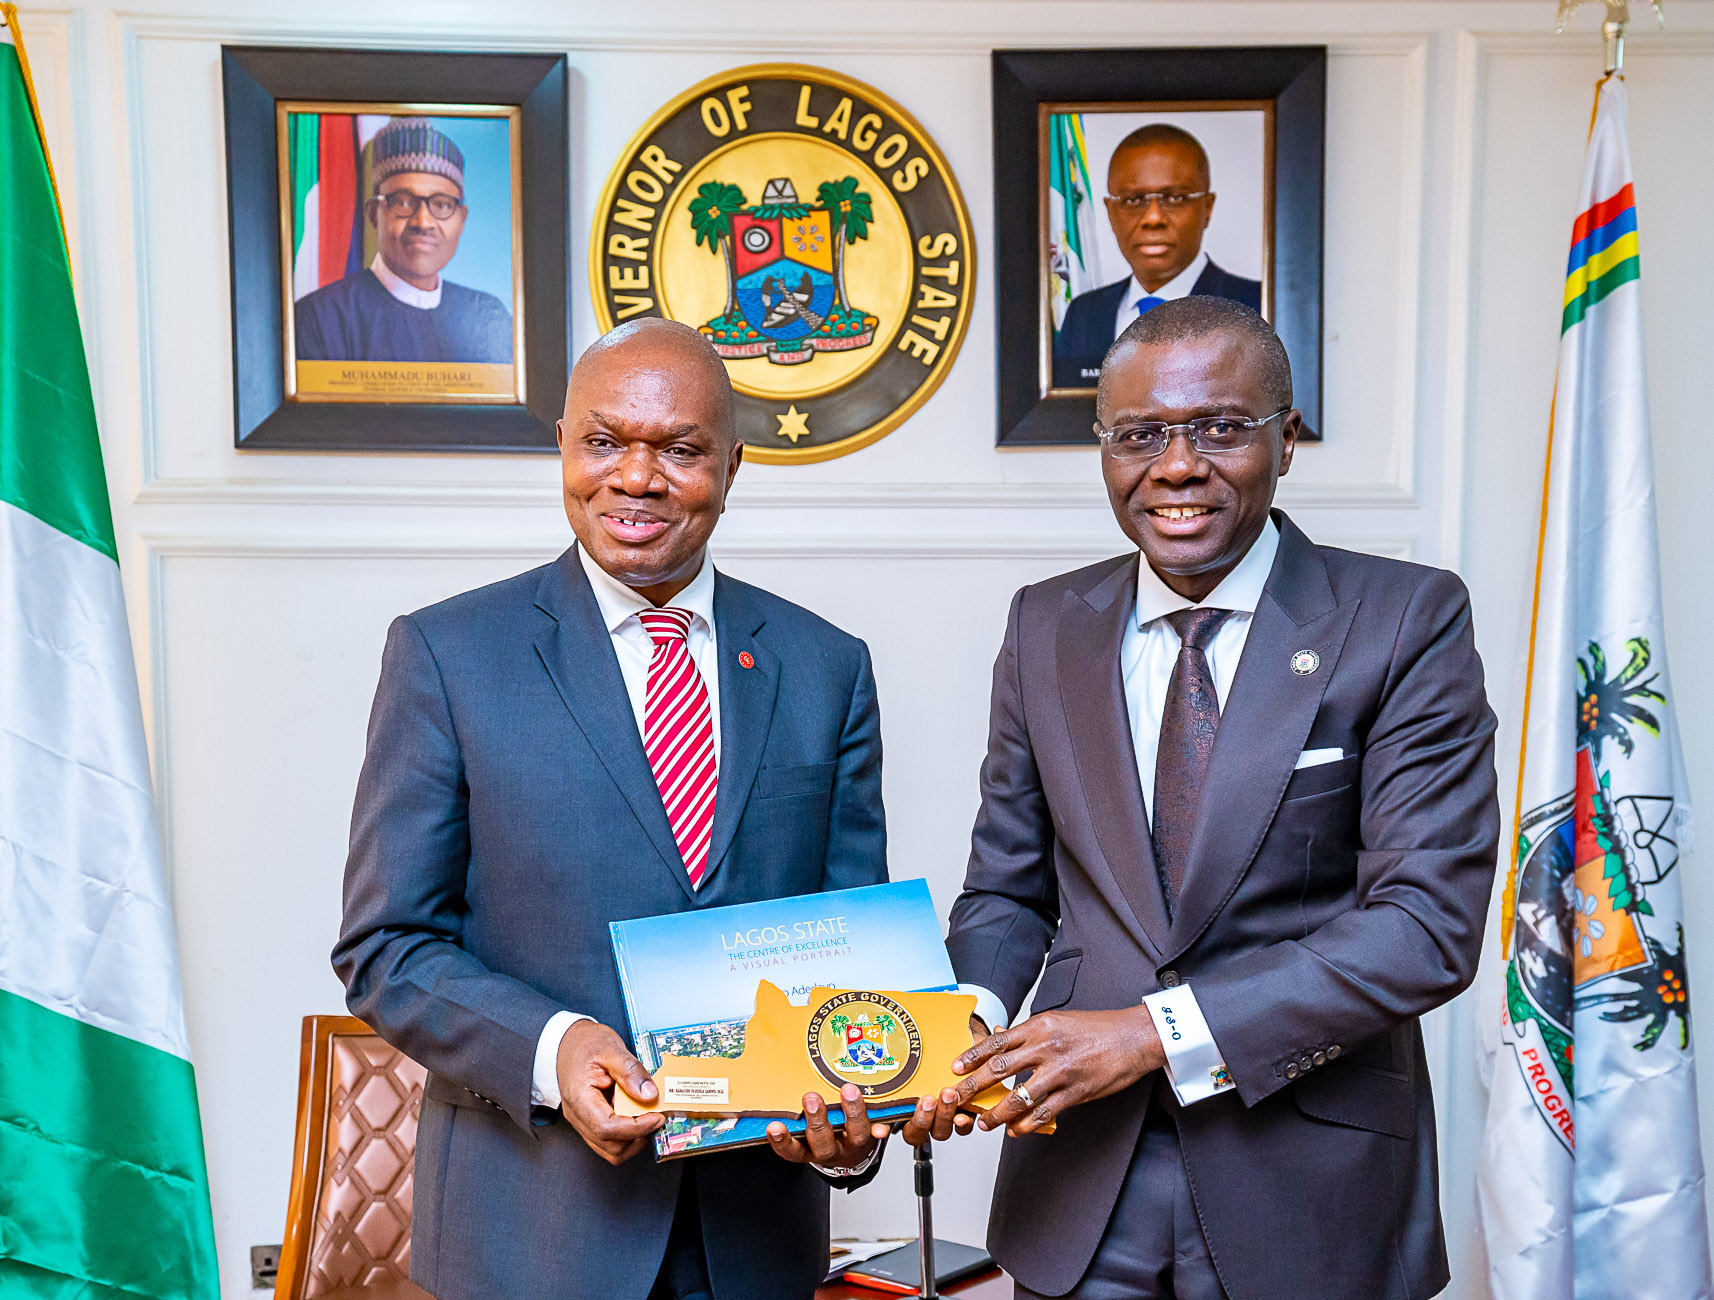 Lagos State Governor, Mr. Babajide Sanwo-Olu (right), presents souvenir to the United Nations Industrial Development Organization (UNIDO) Representative to ECOWAS and Regional Director, Nigeria Regional Office Hub, Mr. Jean Bakole during a courtesy visit to the Governor at Lagos House, Alausa, Ikeja, on Monday, February 3, 2020.